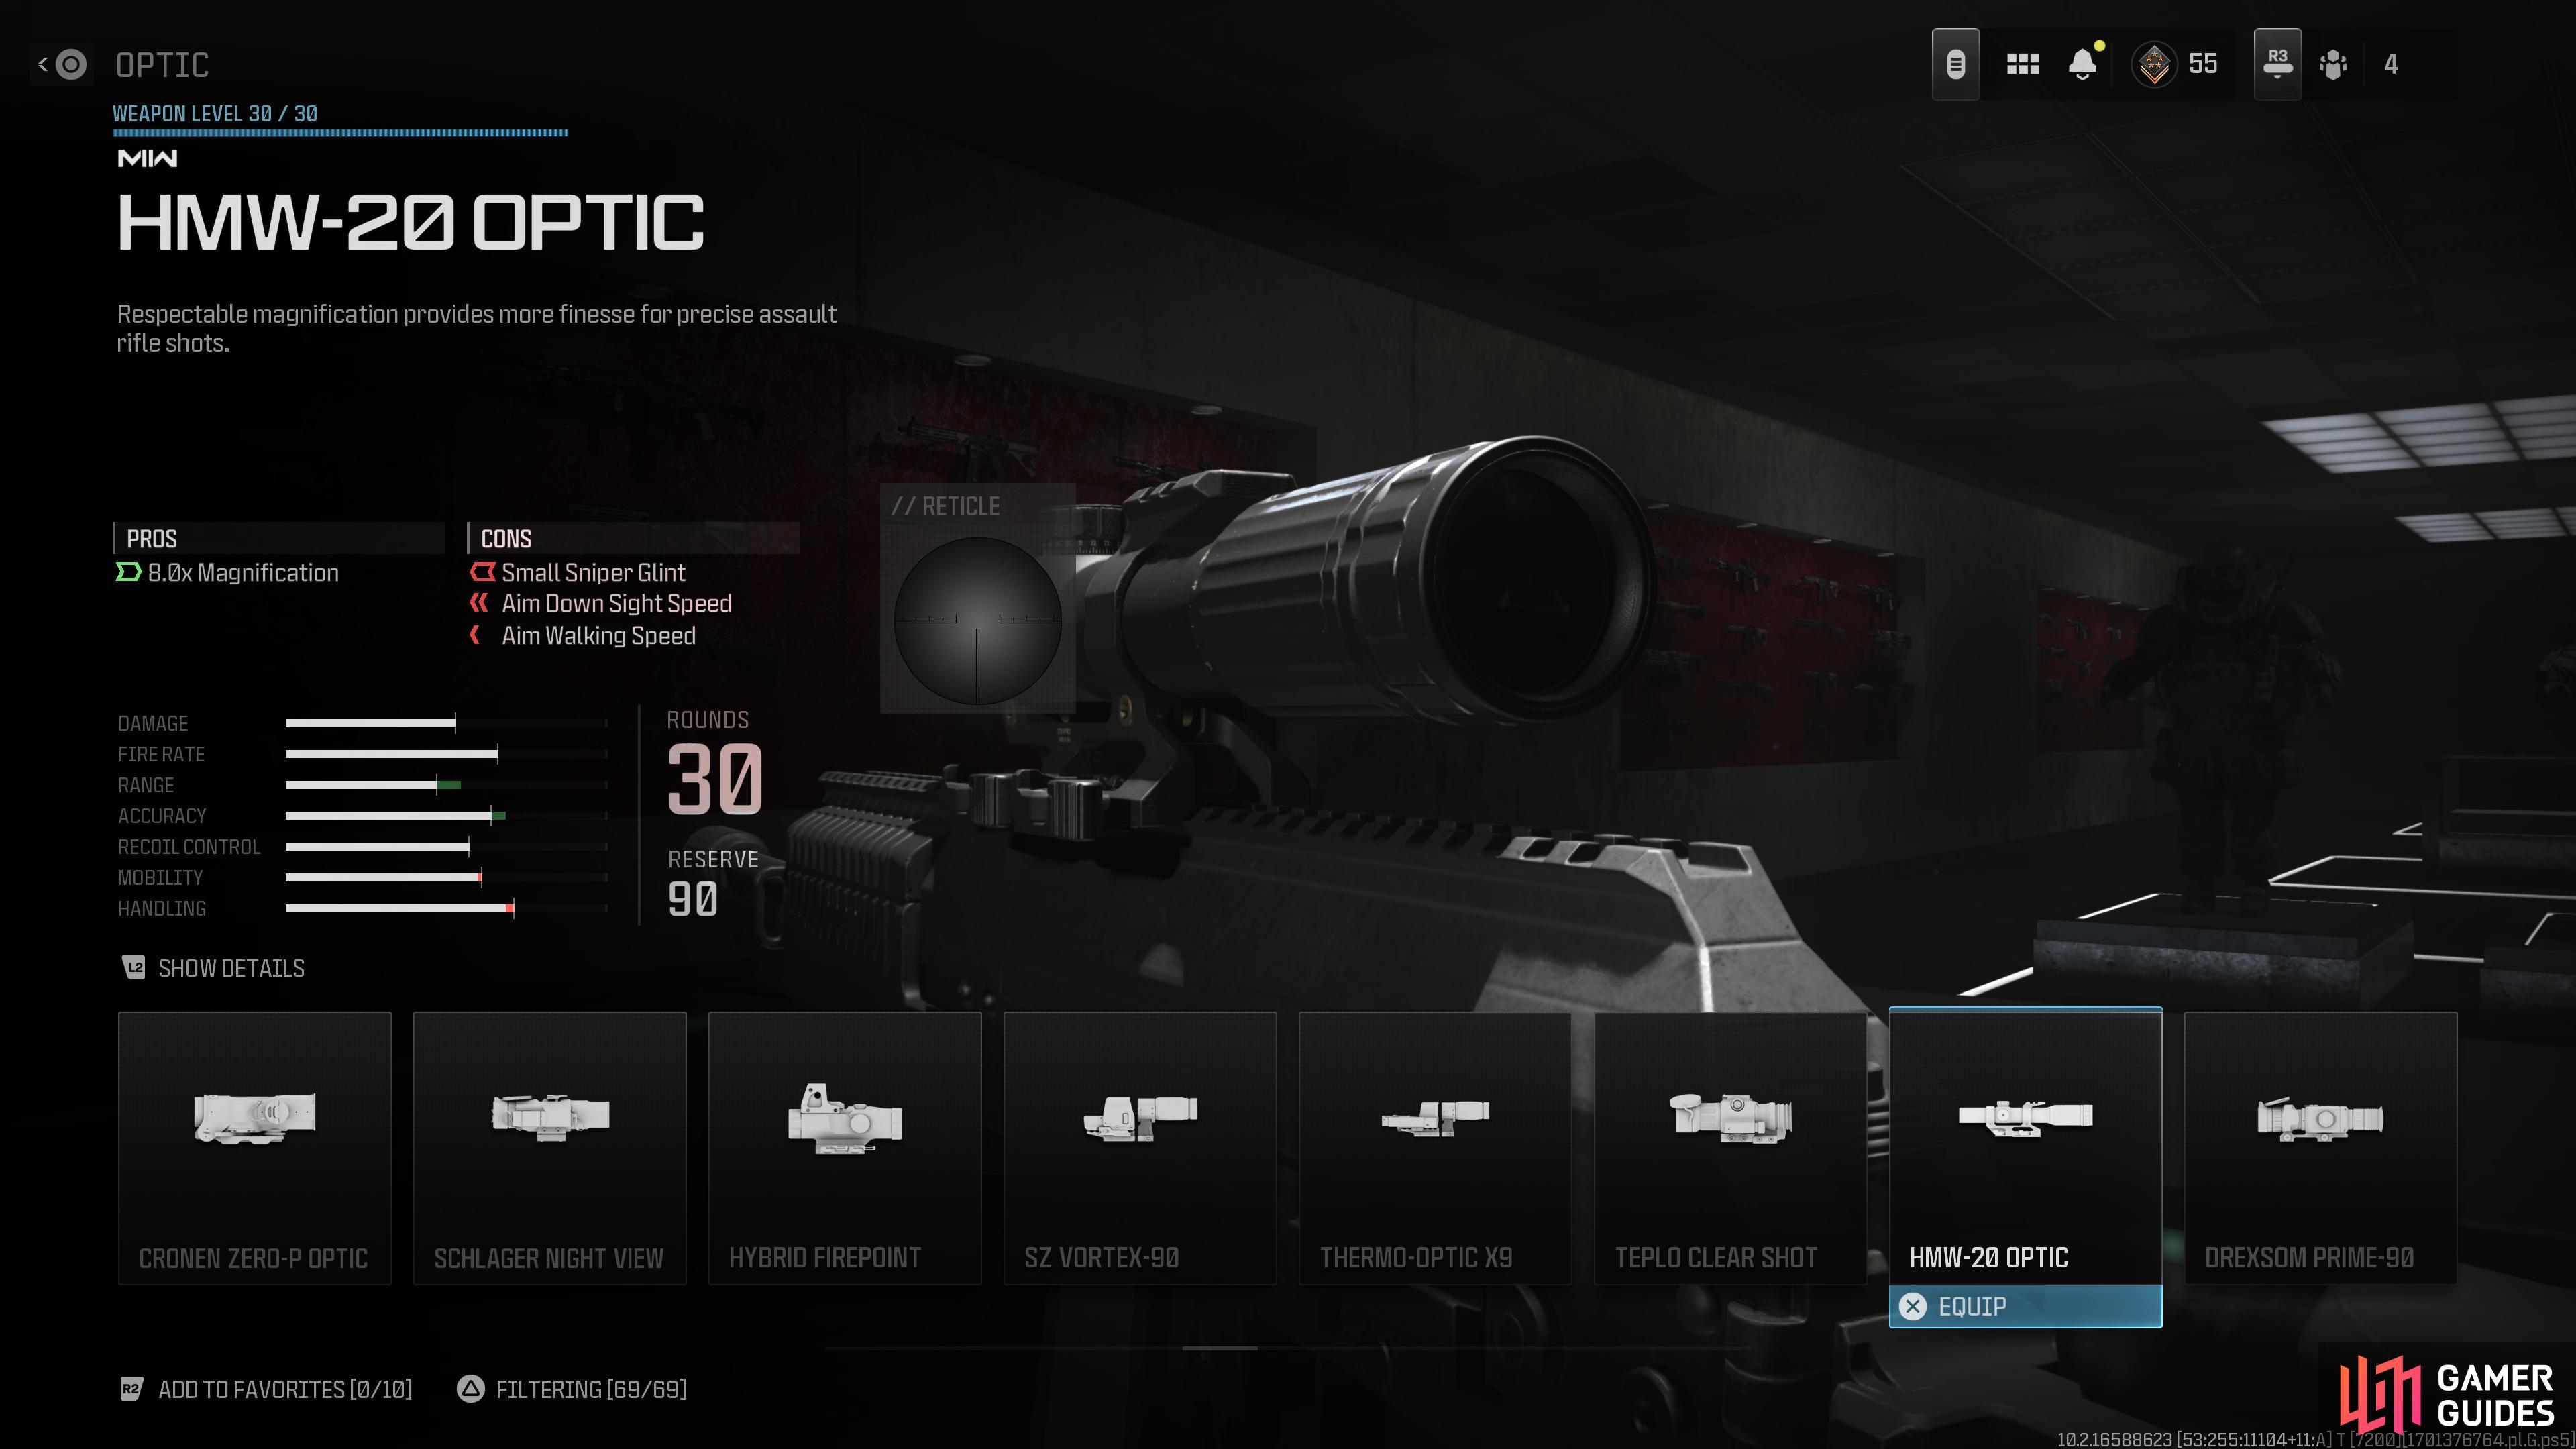 You will need an Extreme Magnification (8x) scope for the Priceless Camo challenge.